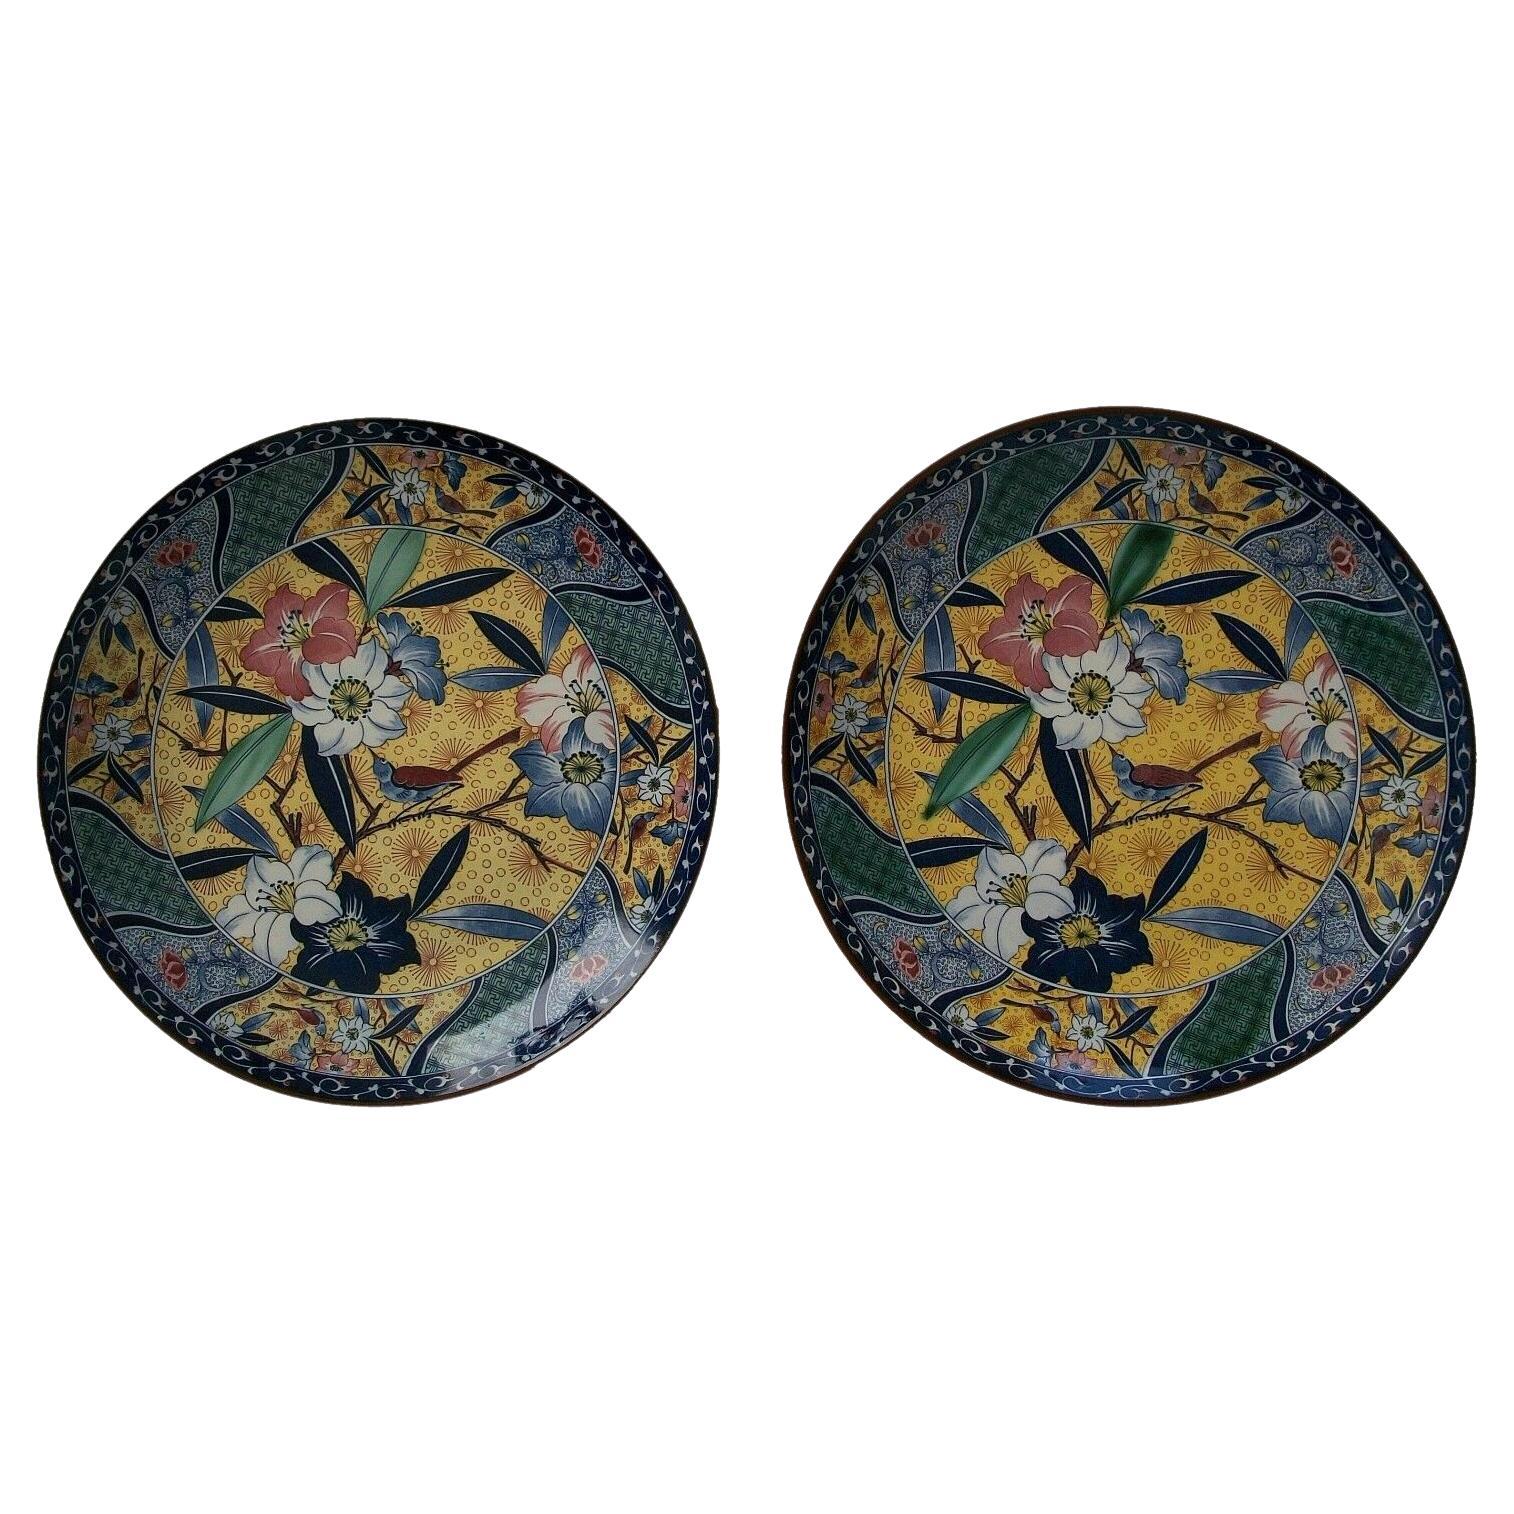 Arts & Crafts Style Transfer Decorated Chargers - Signed - Japan - 20th Century For Sale